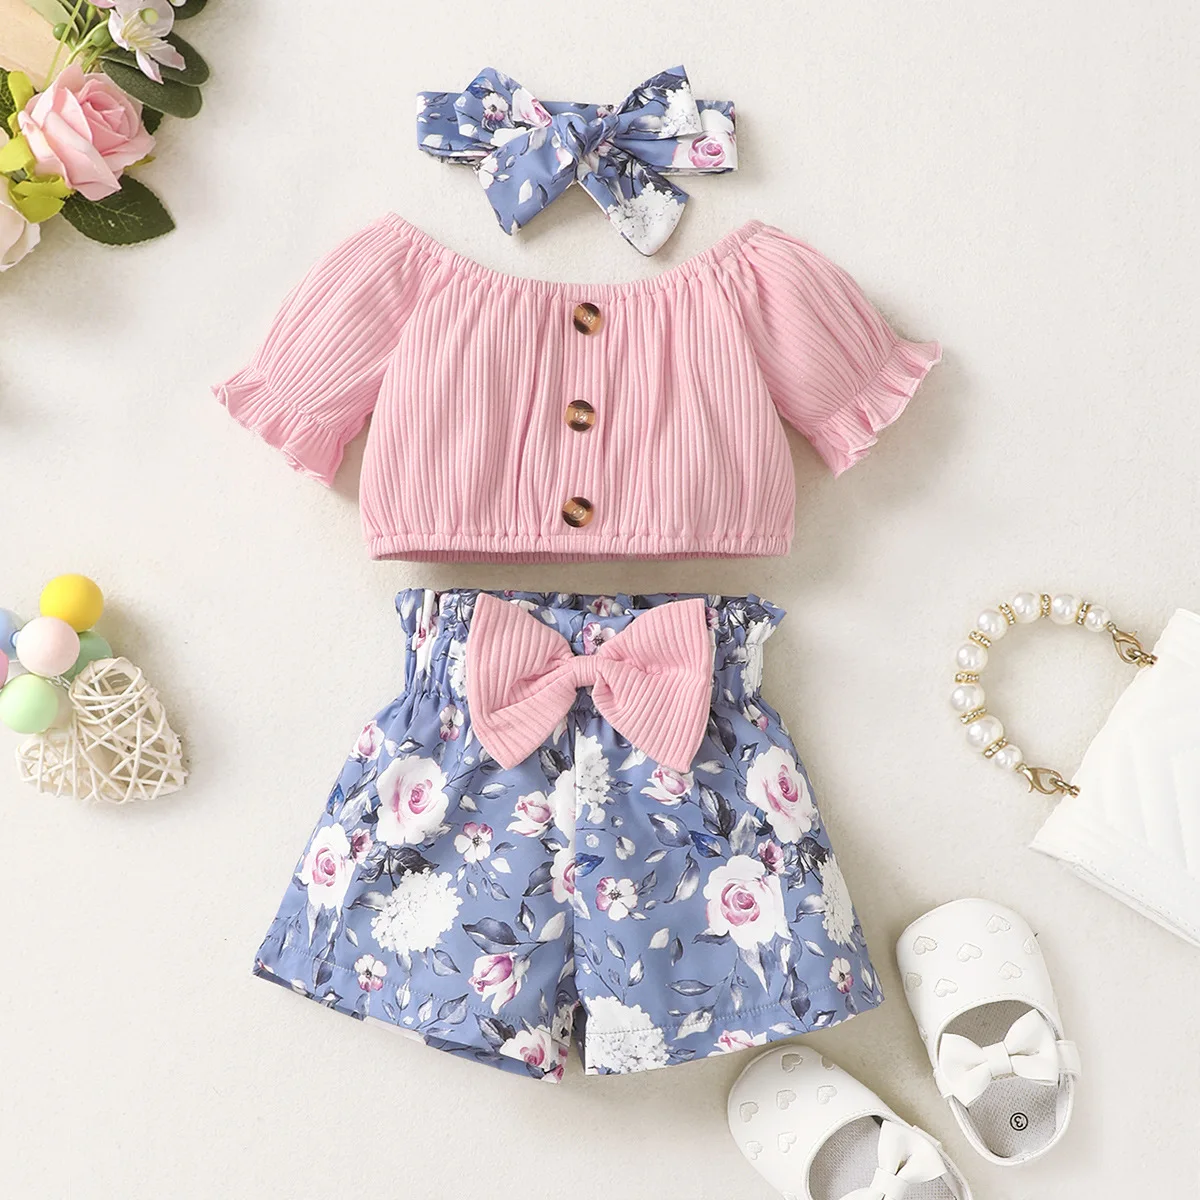 New trendy toddler girls clothing sets sequin short sleeve shirts+pants two piece boutique kids outfits suits